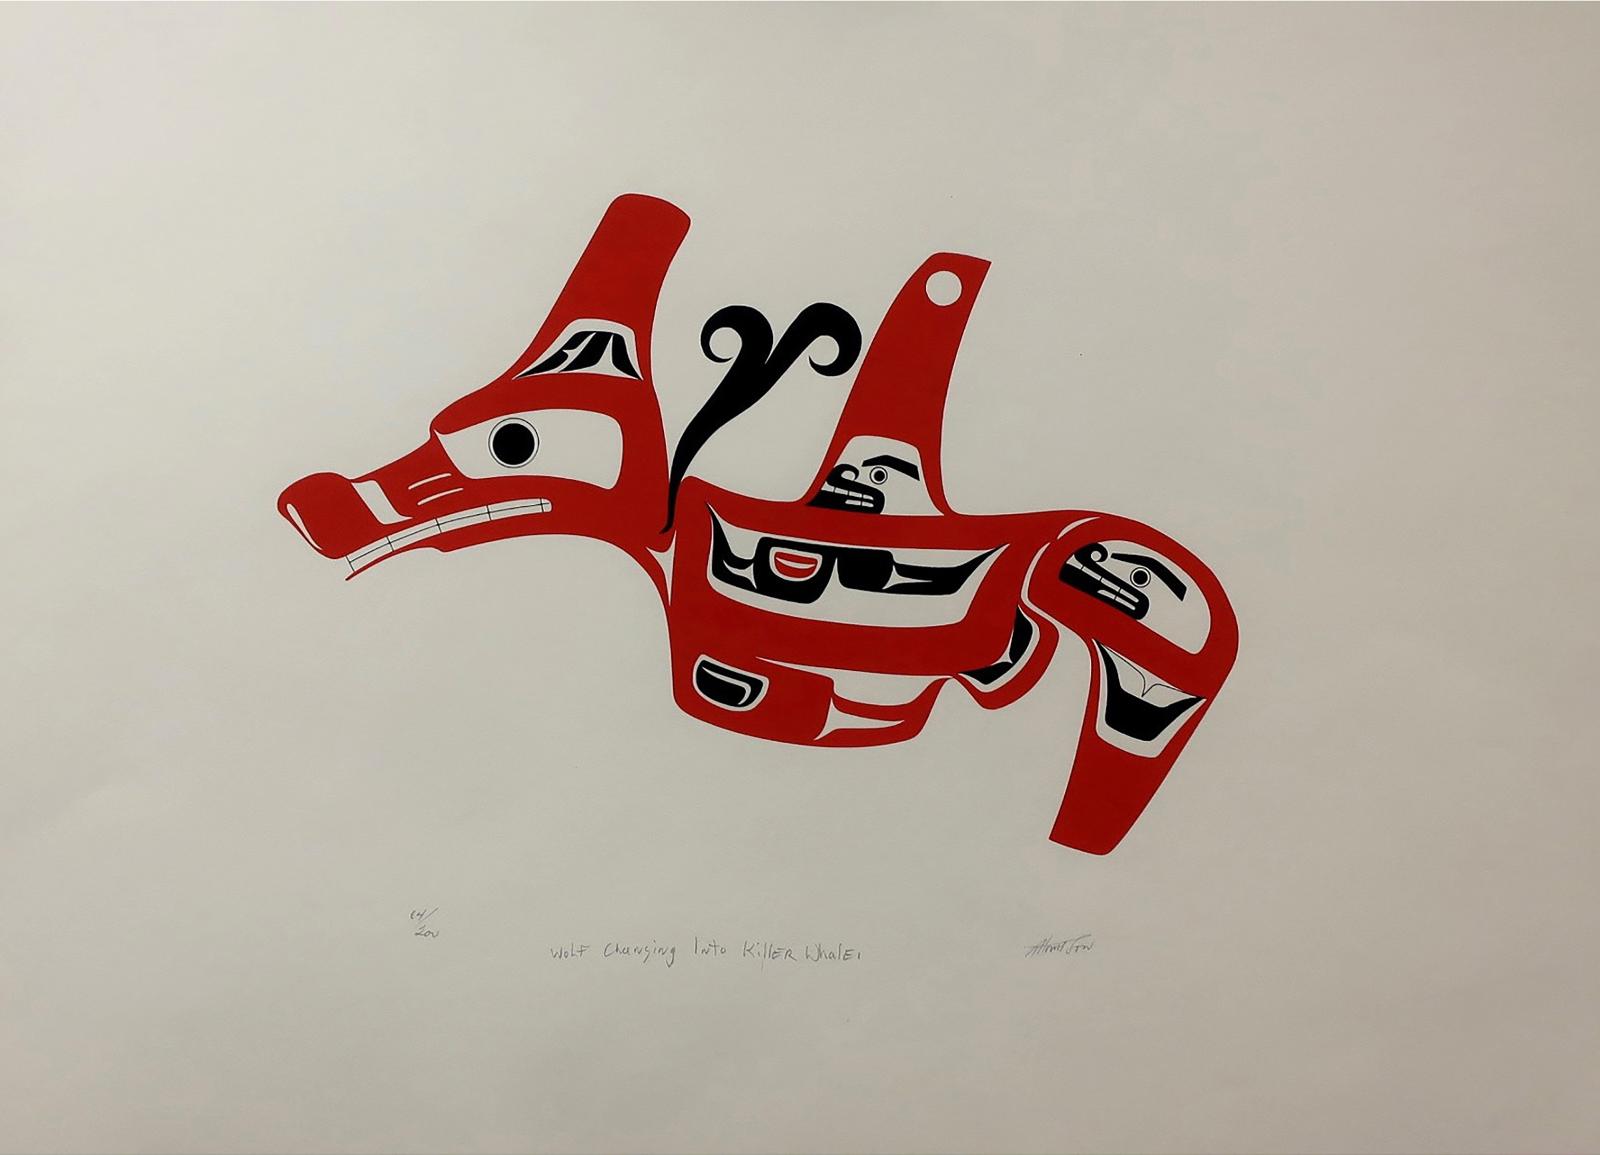 Art Thompson (1948-2003) - Wolf Changing Into Killer Whale